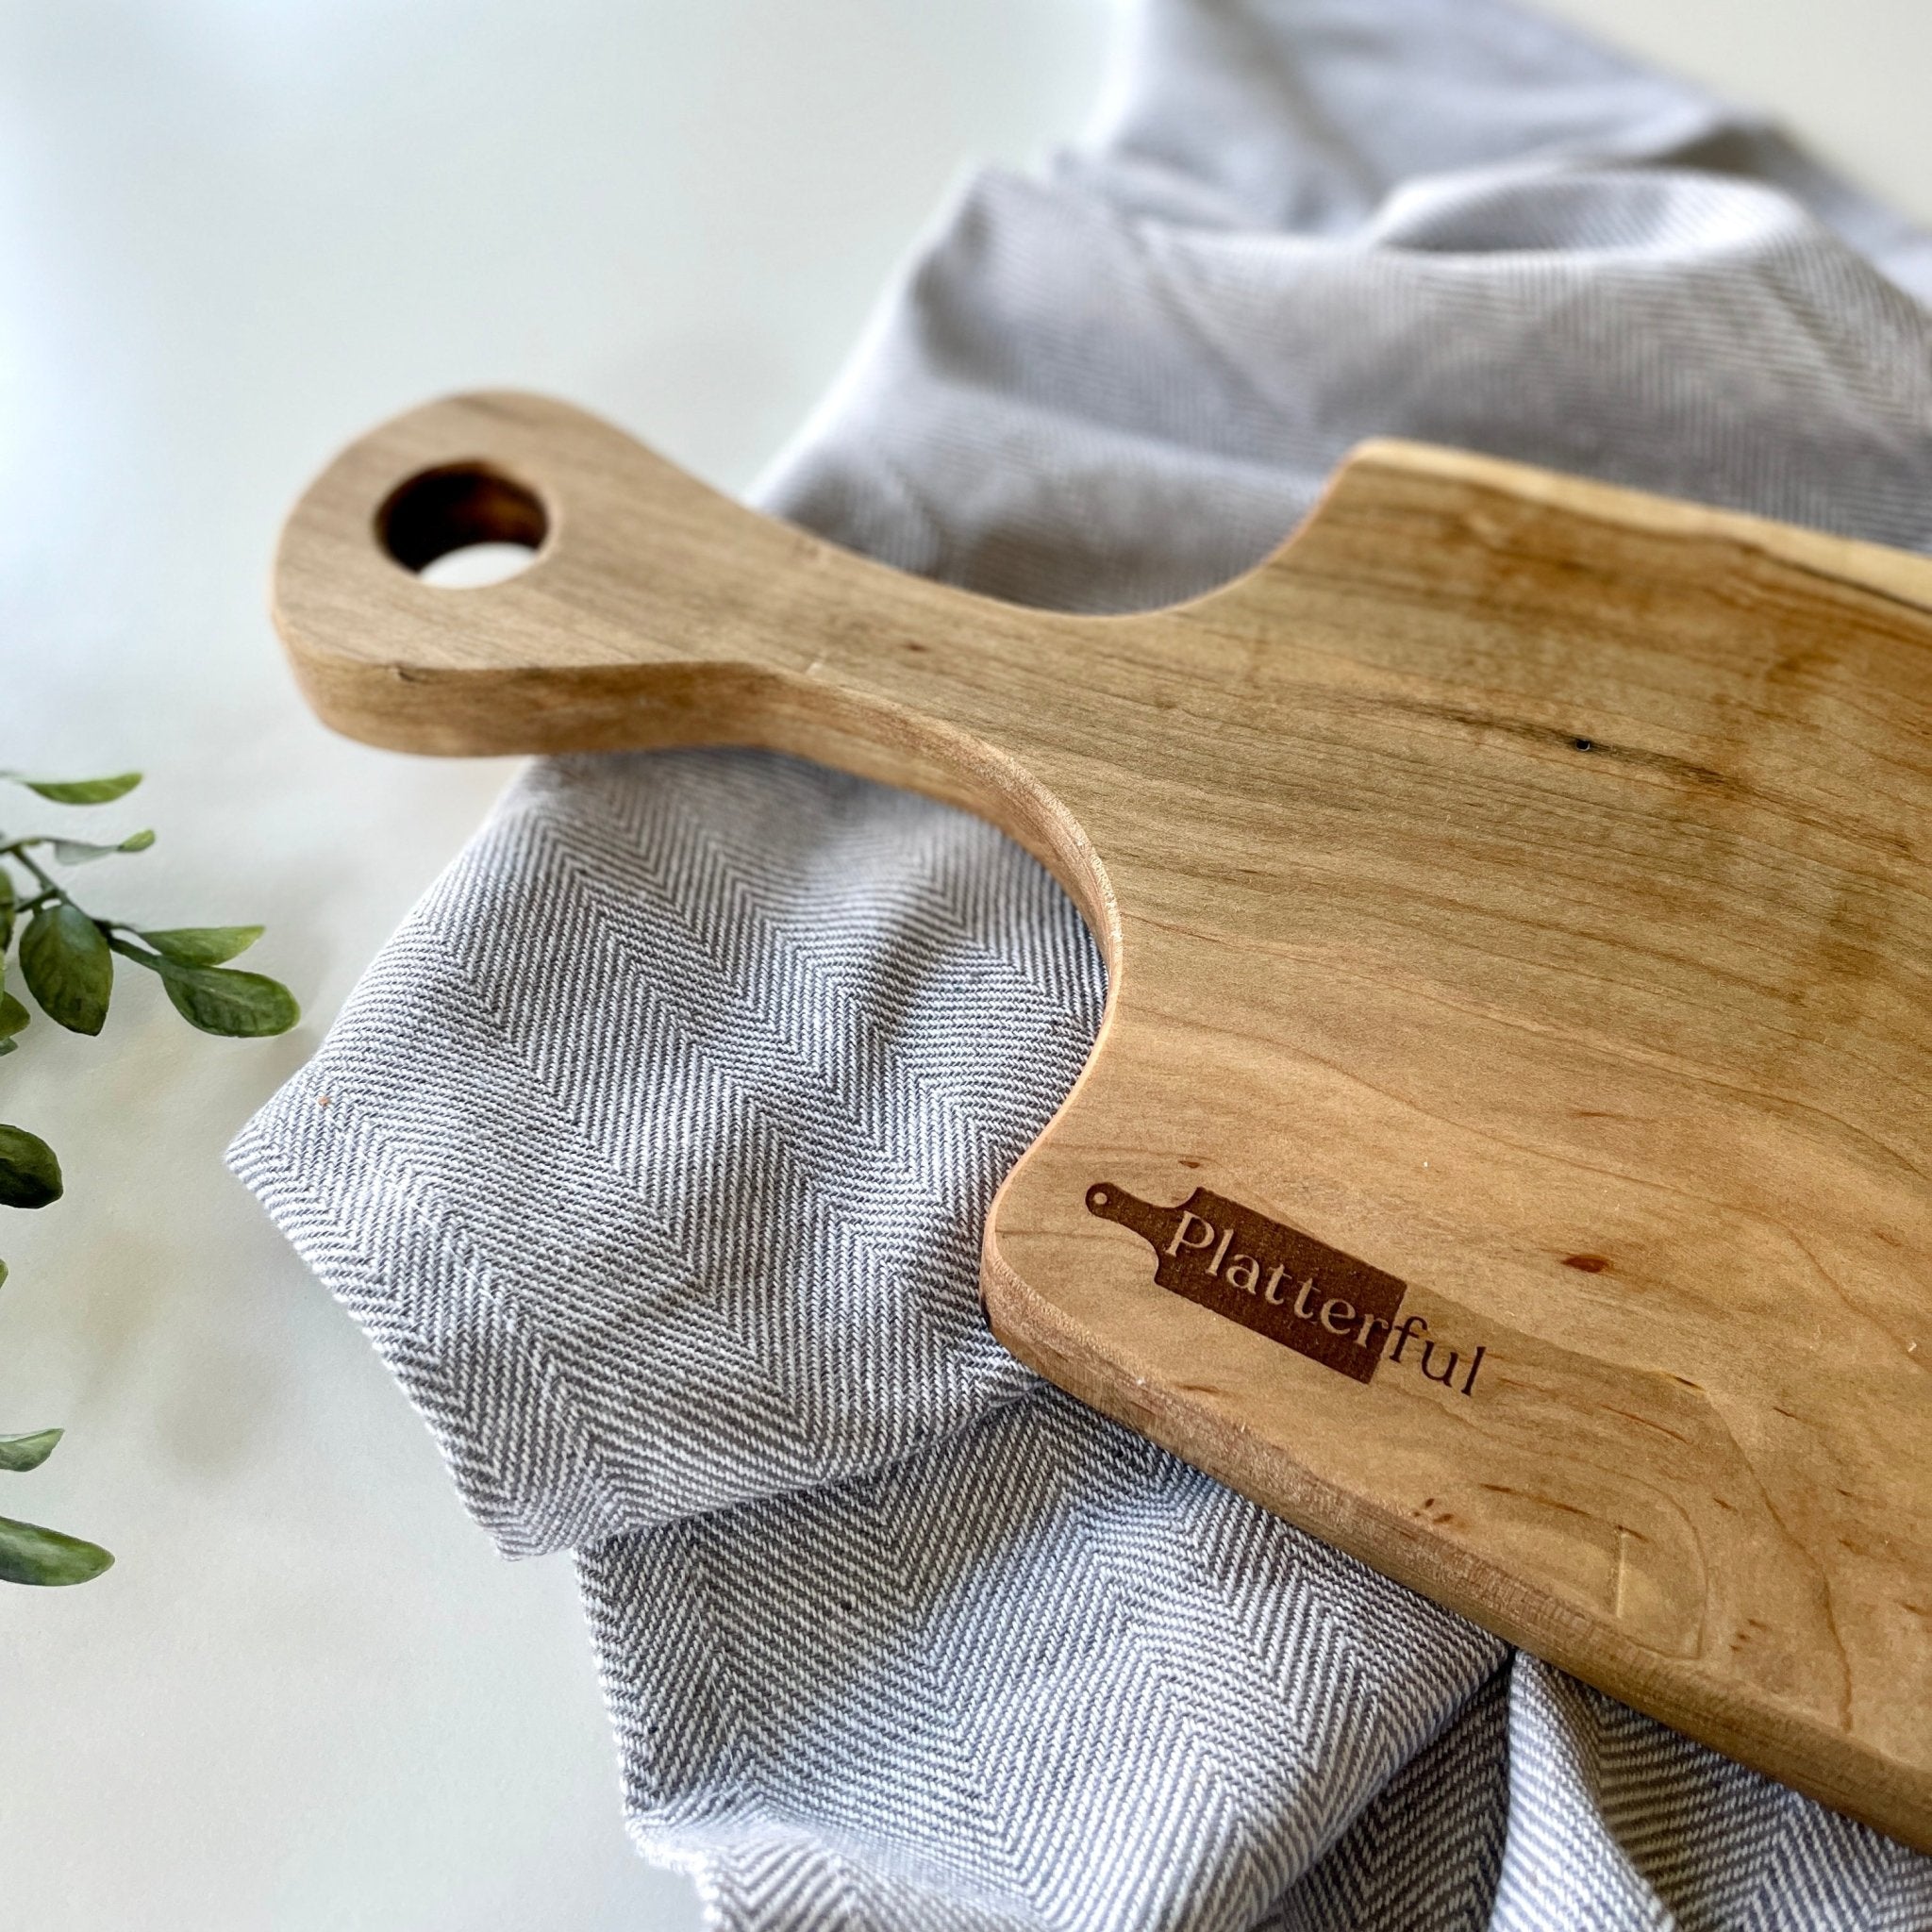 Handcrafted Ambrosia Maple Wood Board with Handle